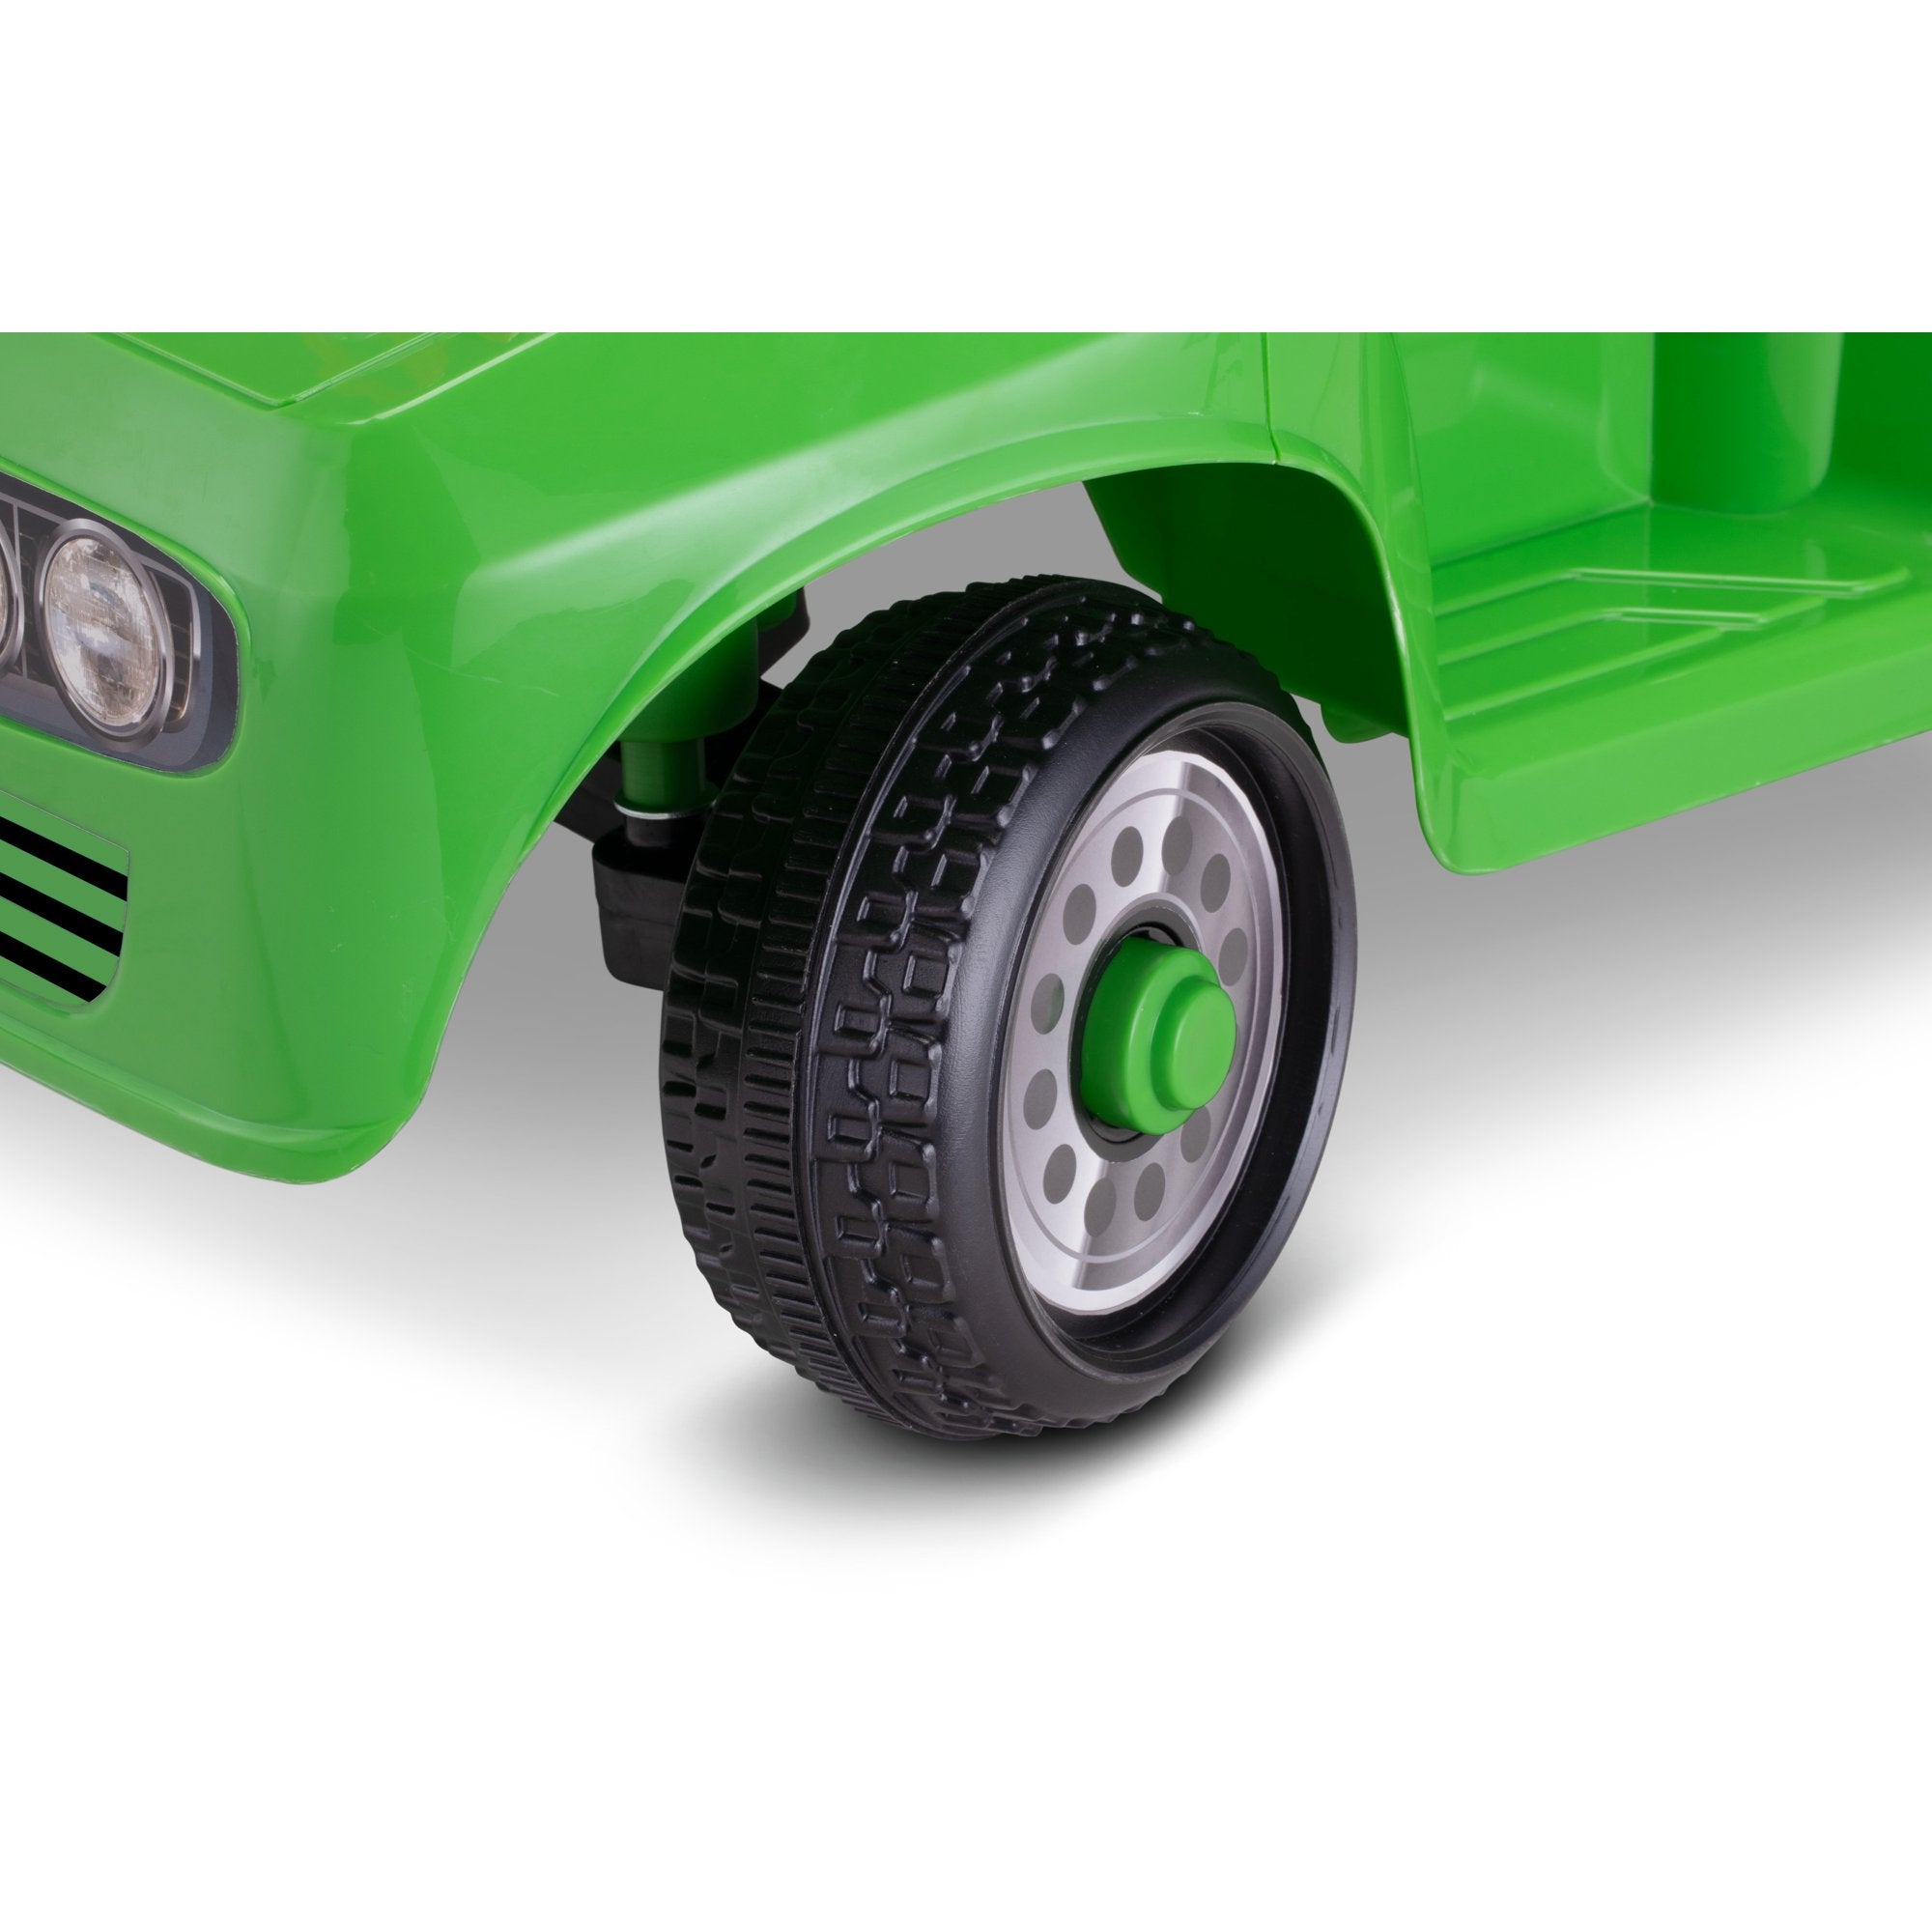 Fix & Ride Car Toddler Ride-On Kids Fun Toy for Boys, Green-Ride On Toys & Accessories-AULEY